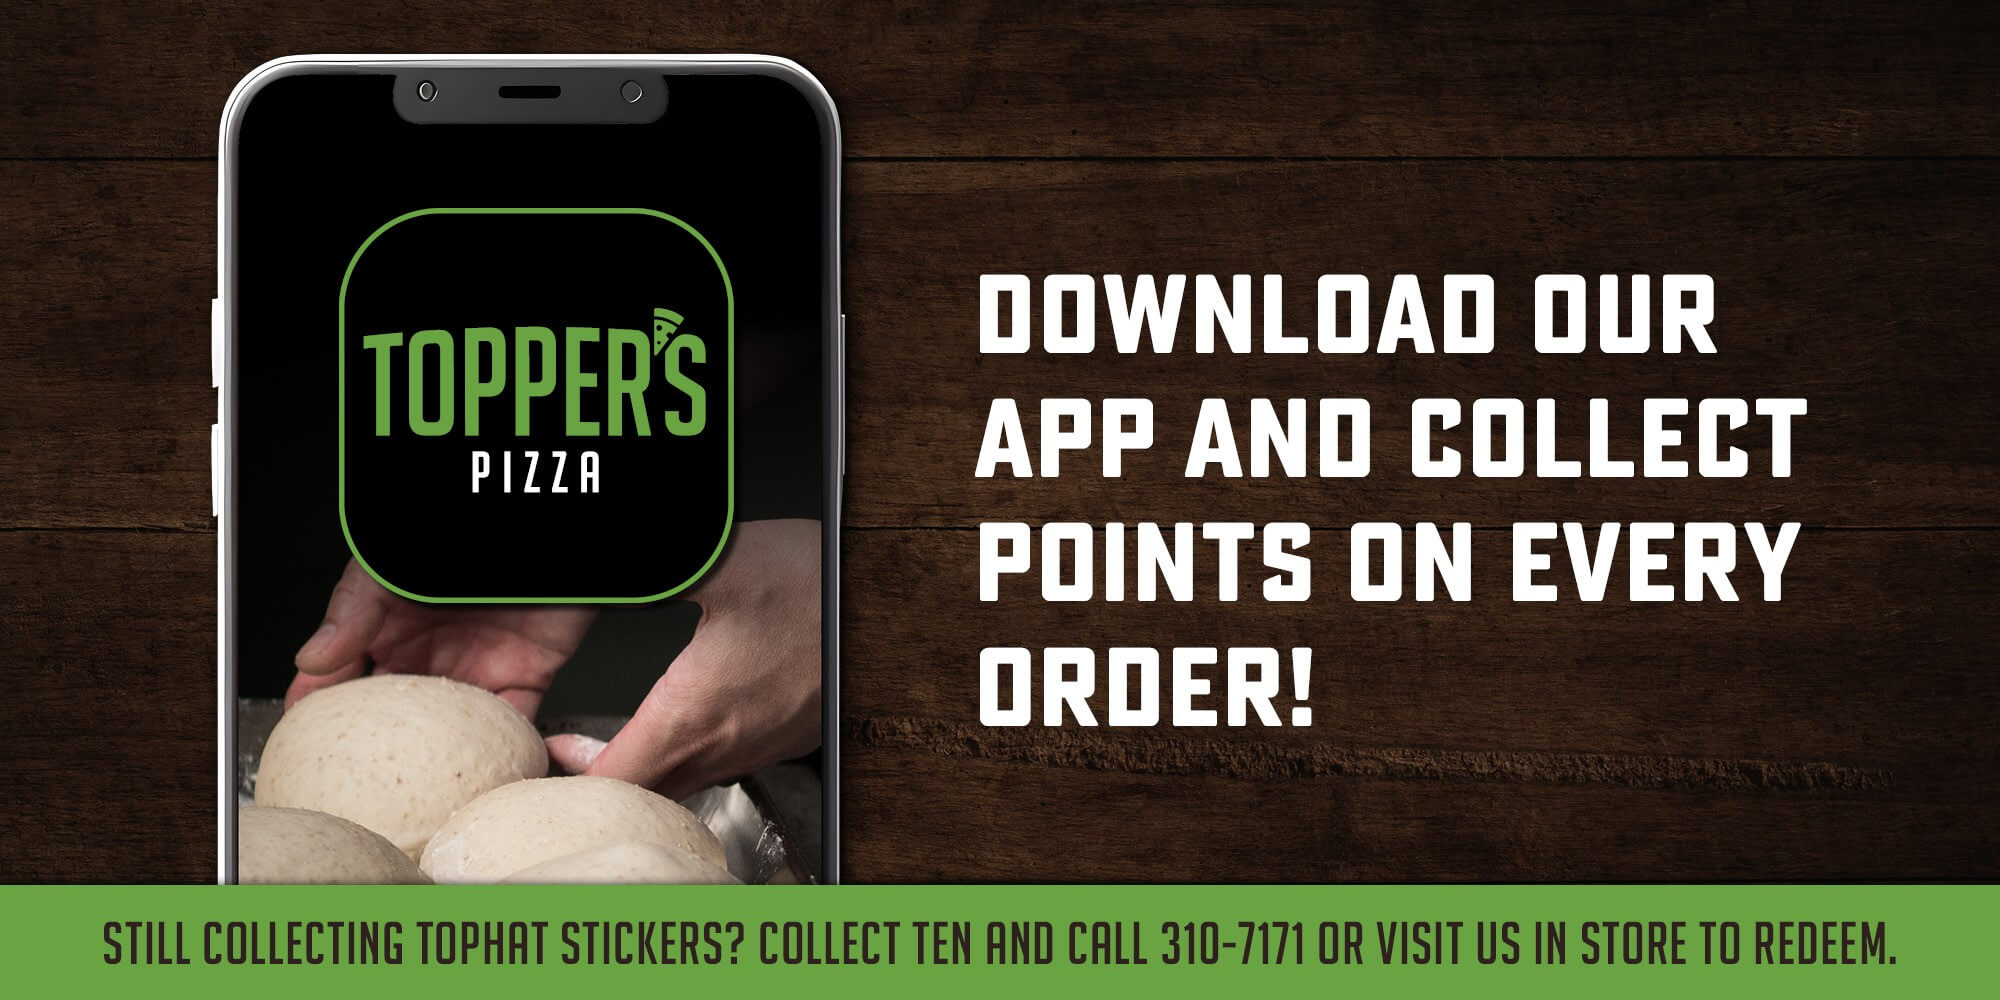 Download Topper's app to collect point